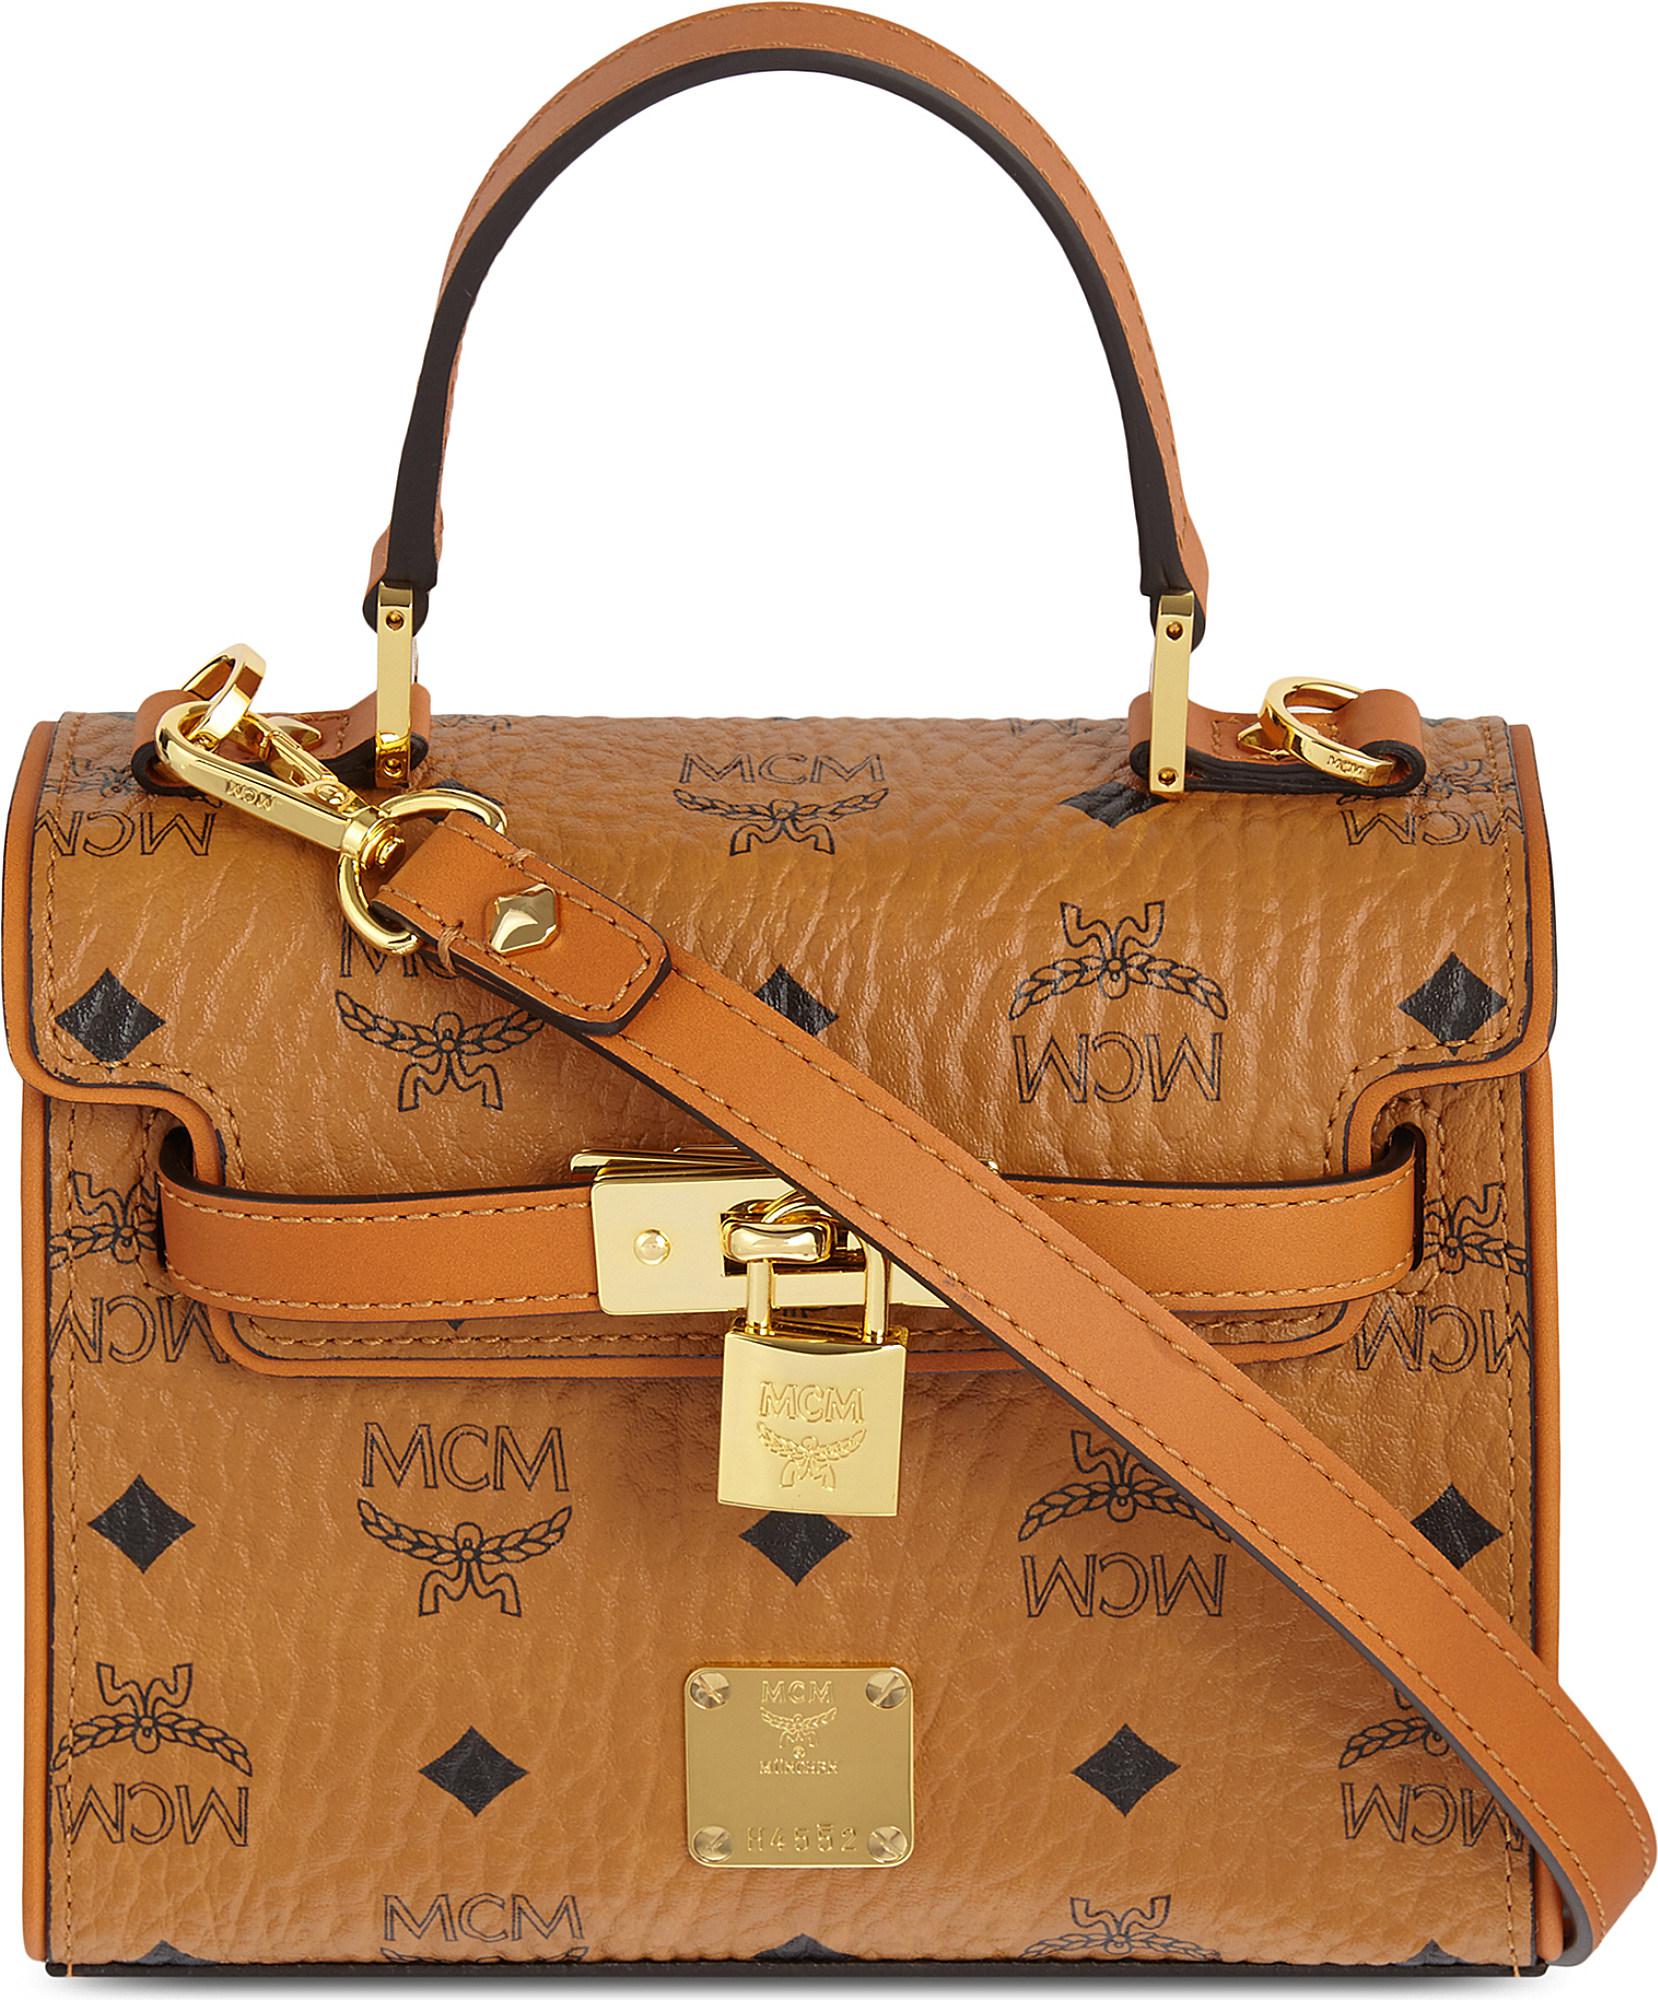 Lyst - Mcm Gold Visetos Small Doctor Bag in Brown - Save 34%